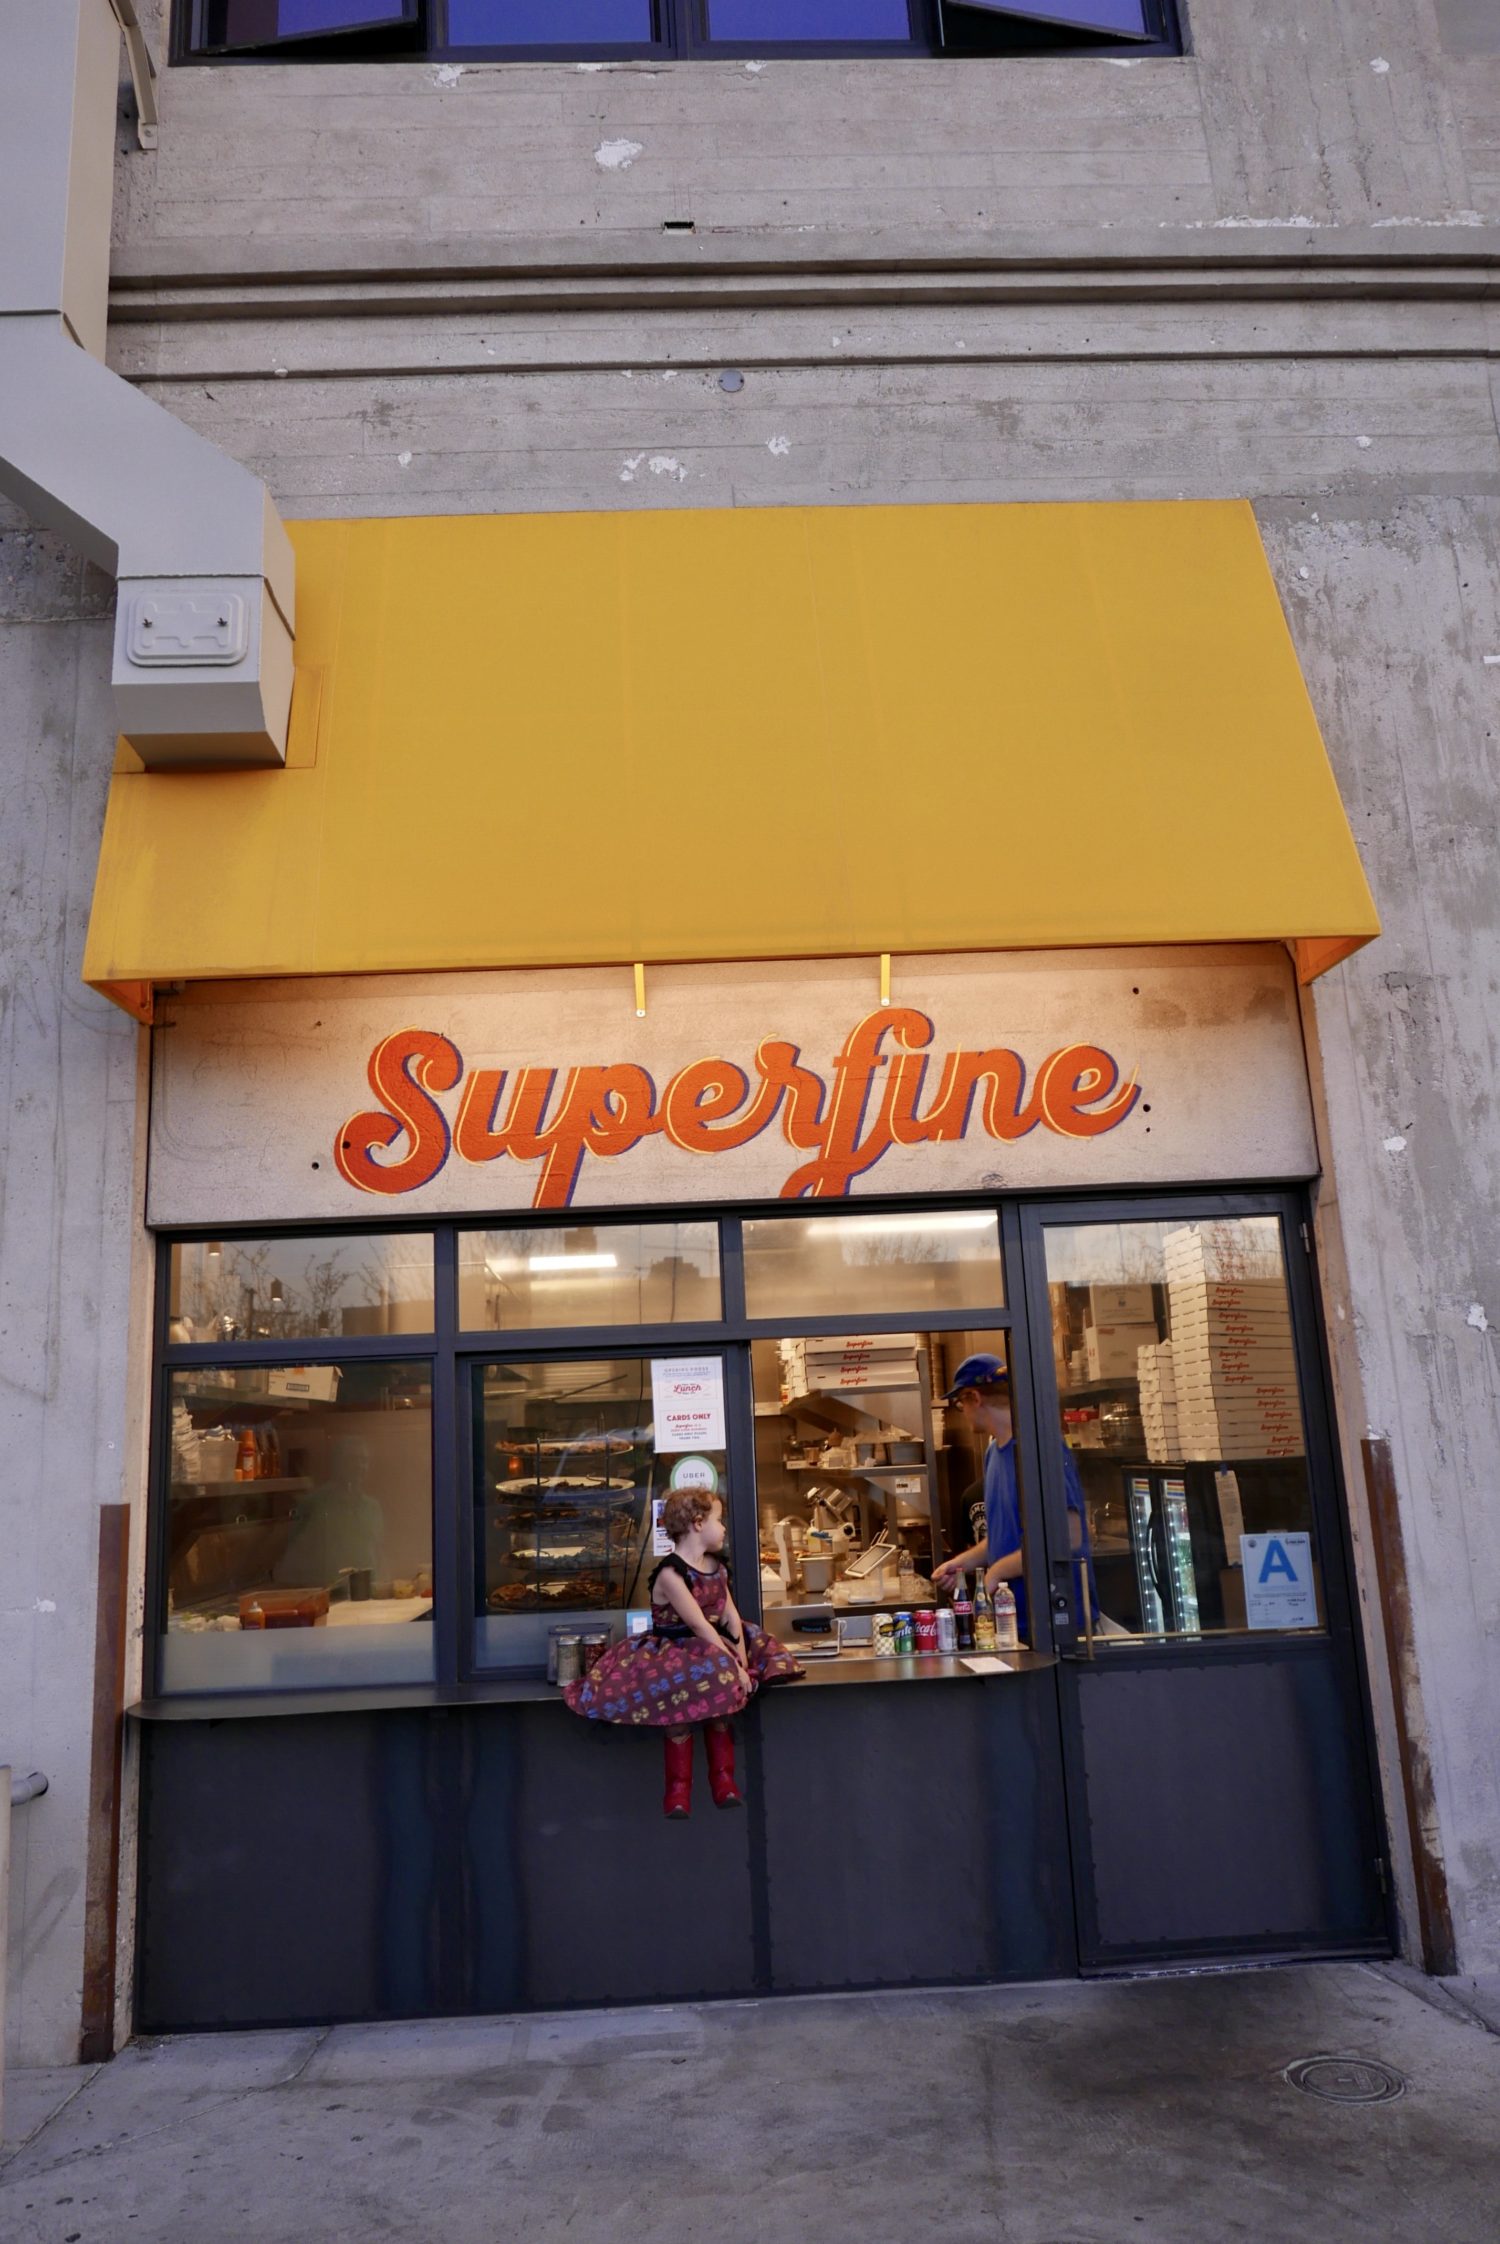 A man is standing in front of a Superfine Pizza store.